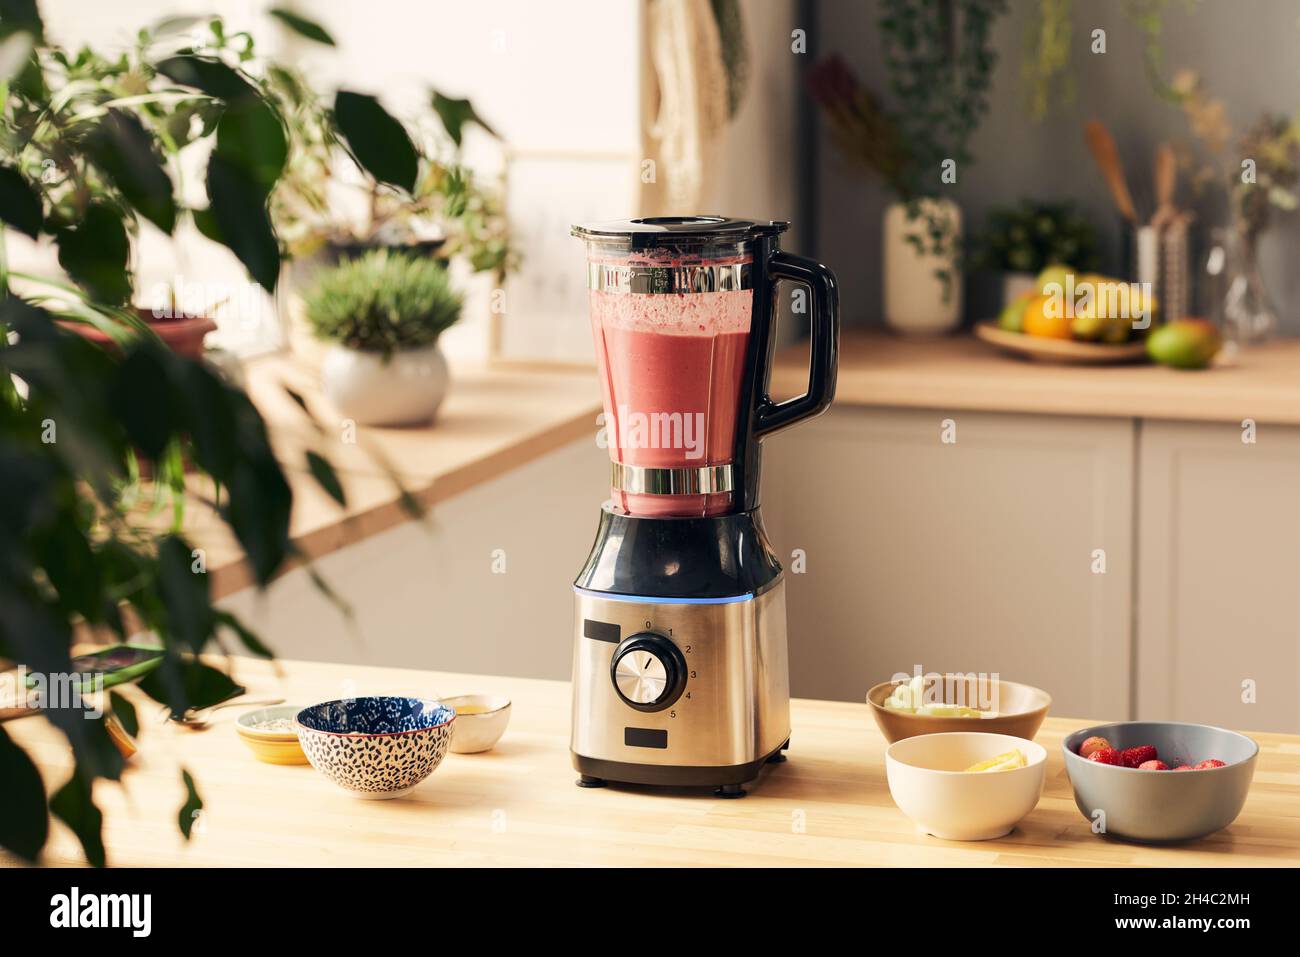 https://c8.alamy.com/comp/2H4C2MH/electric-blender-with-fresh-homemade-fruit-smoothie-and-group-of-bowls-containing-ingredients-on-wooden-kitchen-table-2H4C2MH.jpg